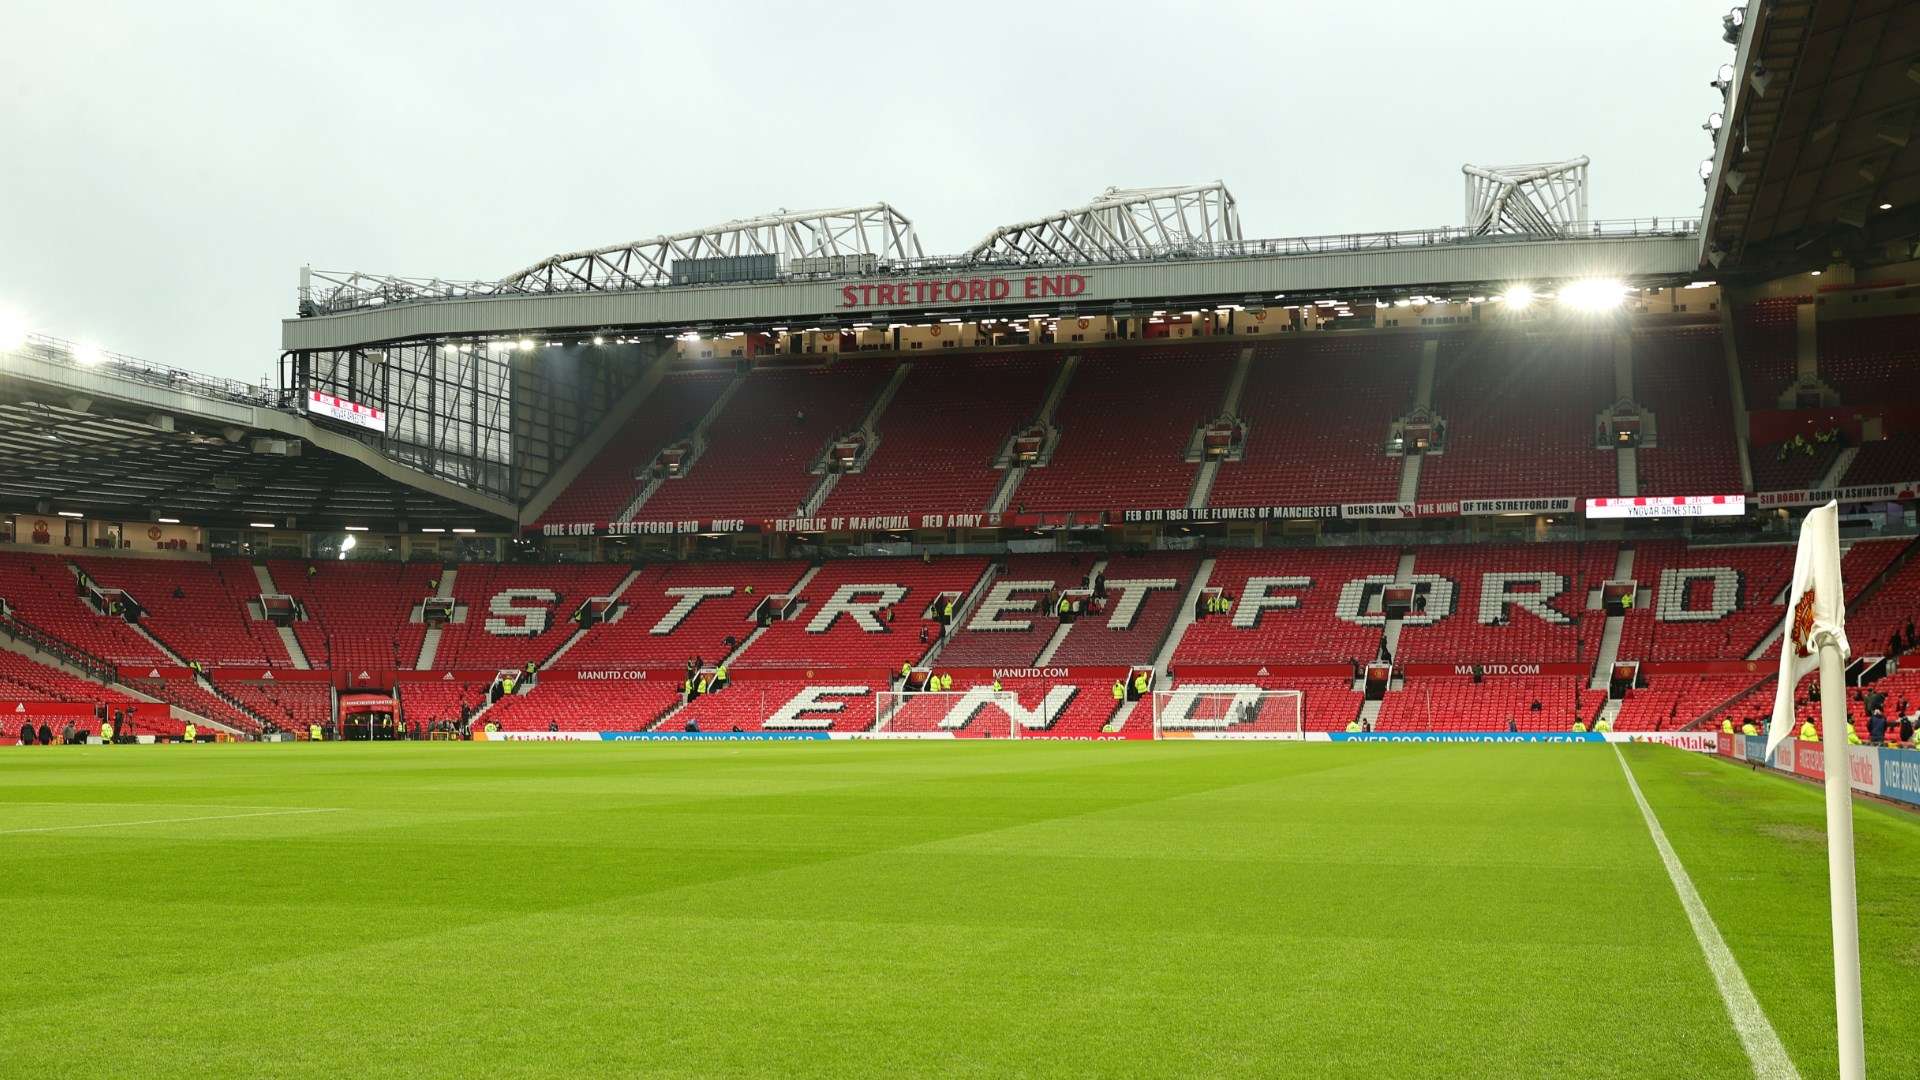 Man Utd need a world-class stadium to compete with the biggest clubs again  - Old Trafford has become a symbol of the club's decay and Red Devils need  to stop living in